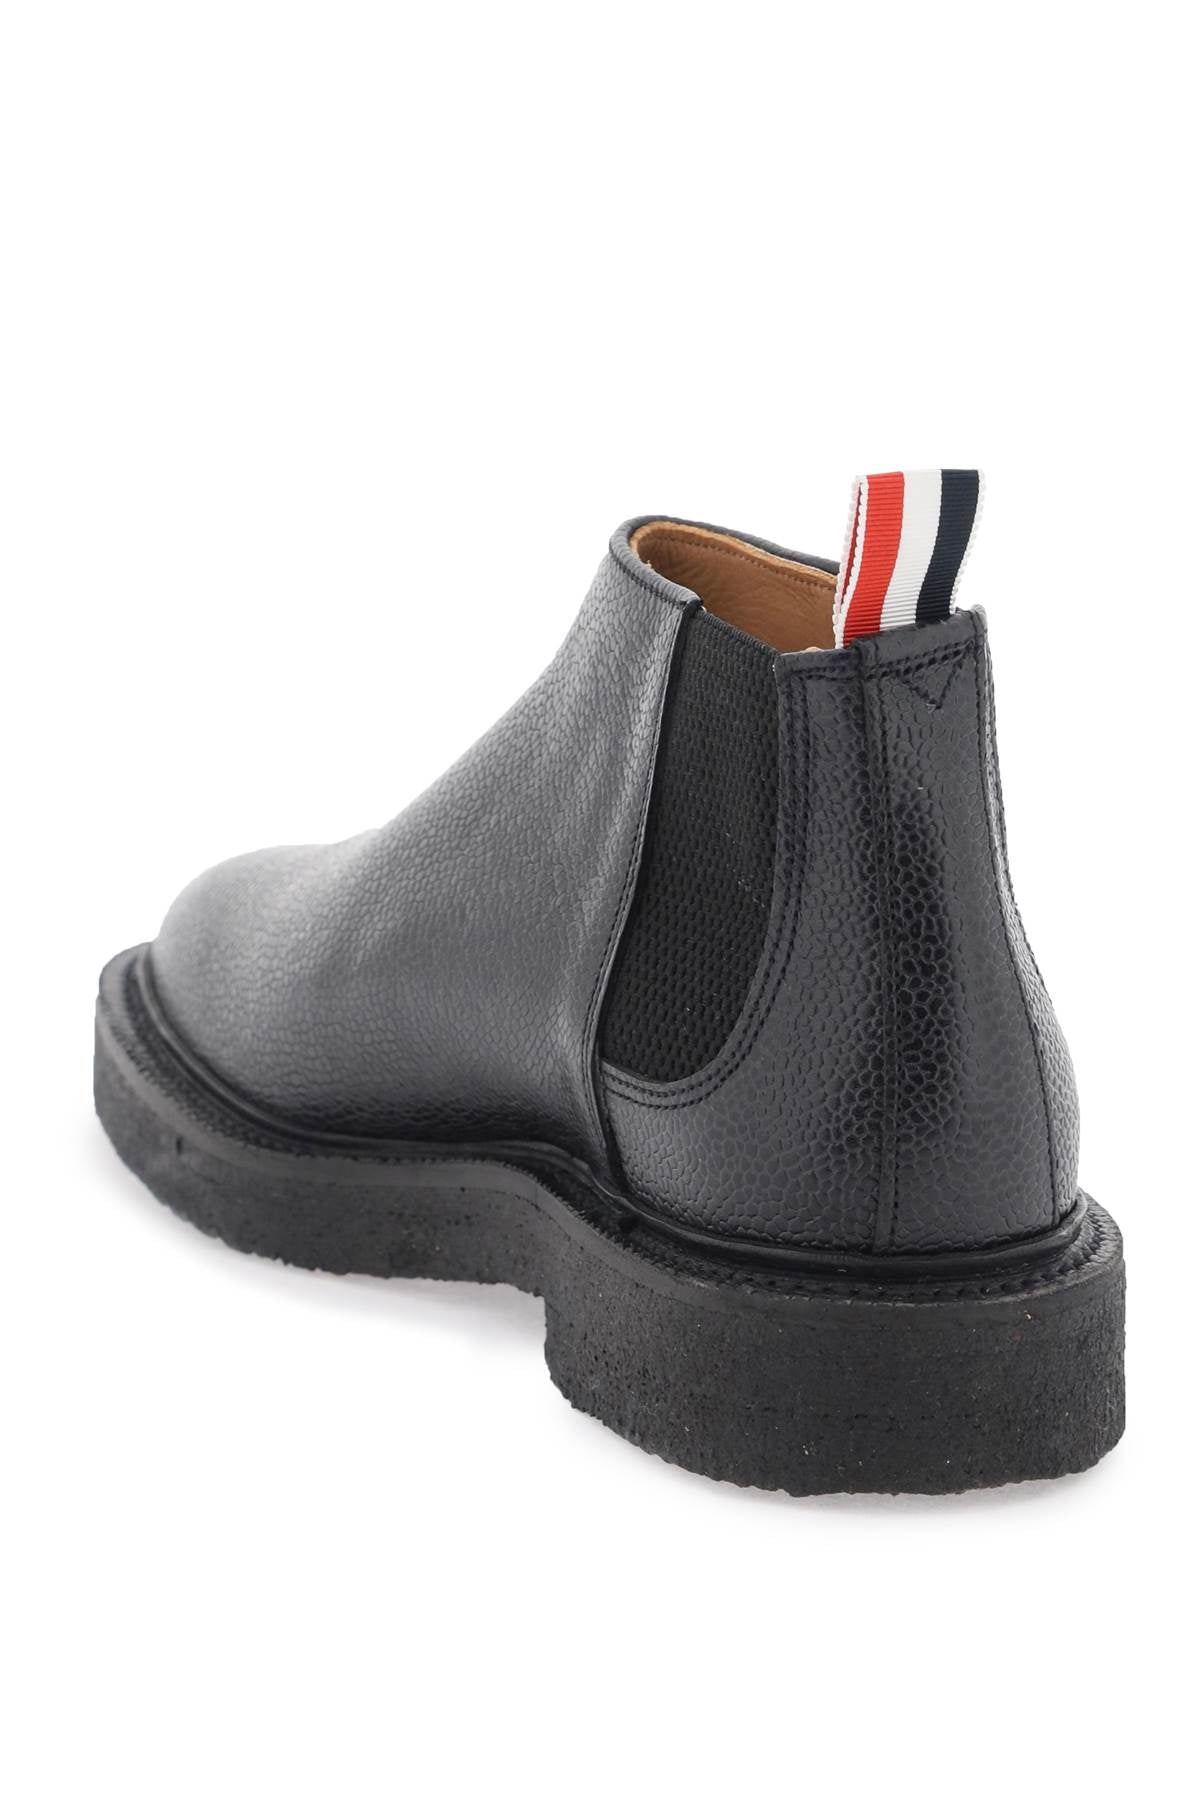 Thom browne mid top chelsea ankle boots-2